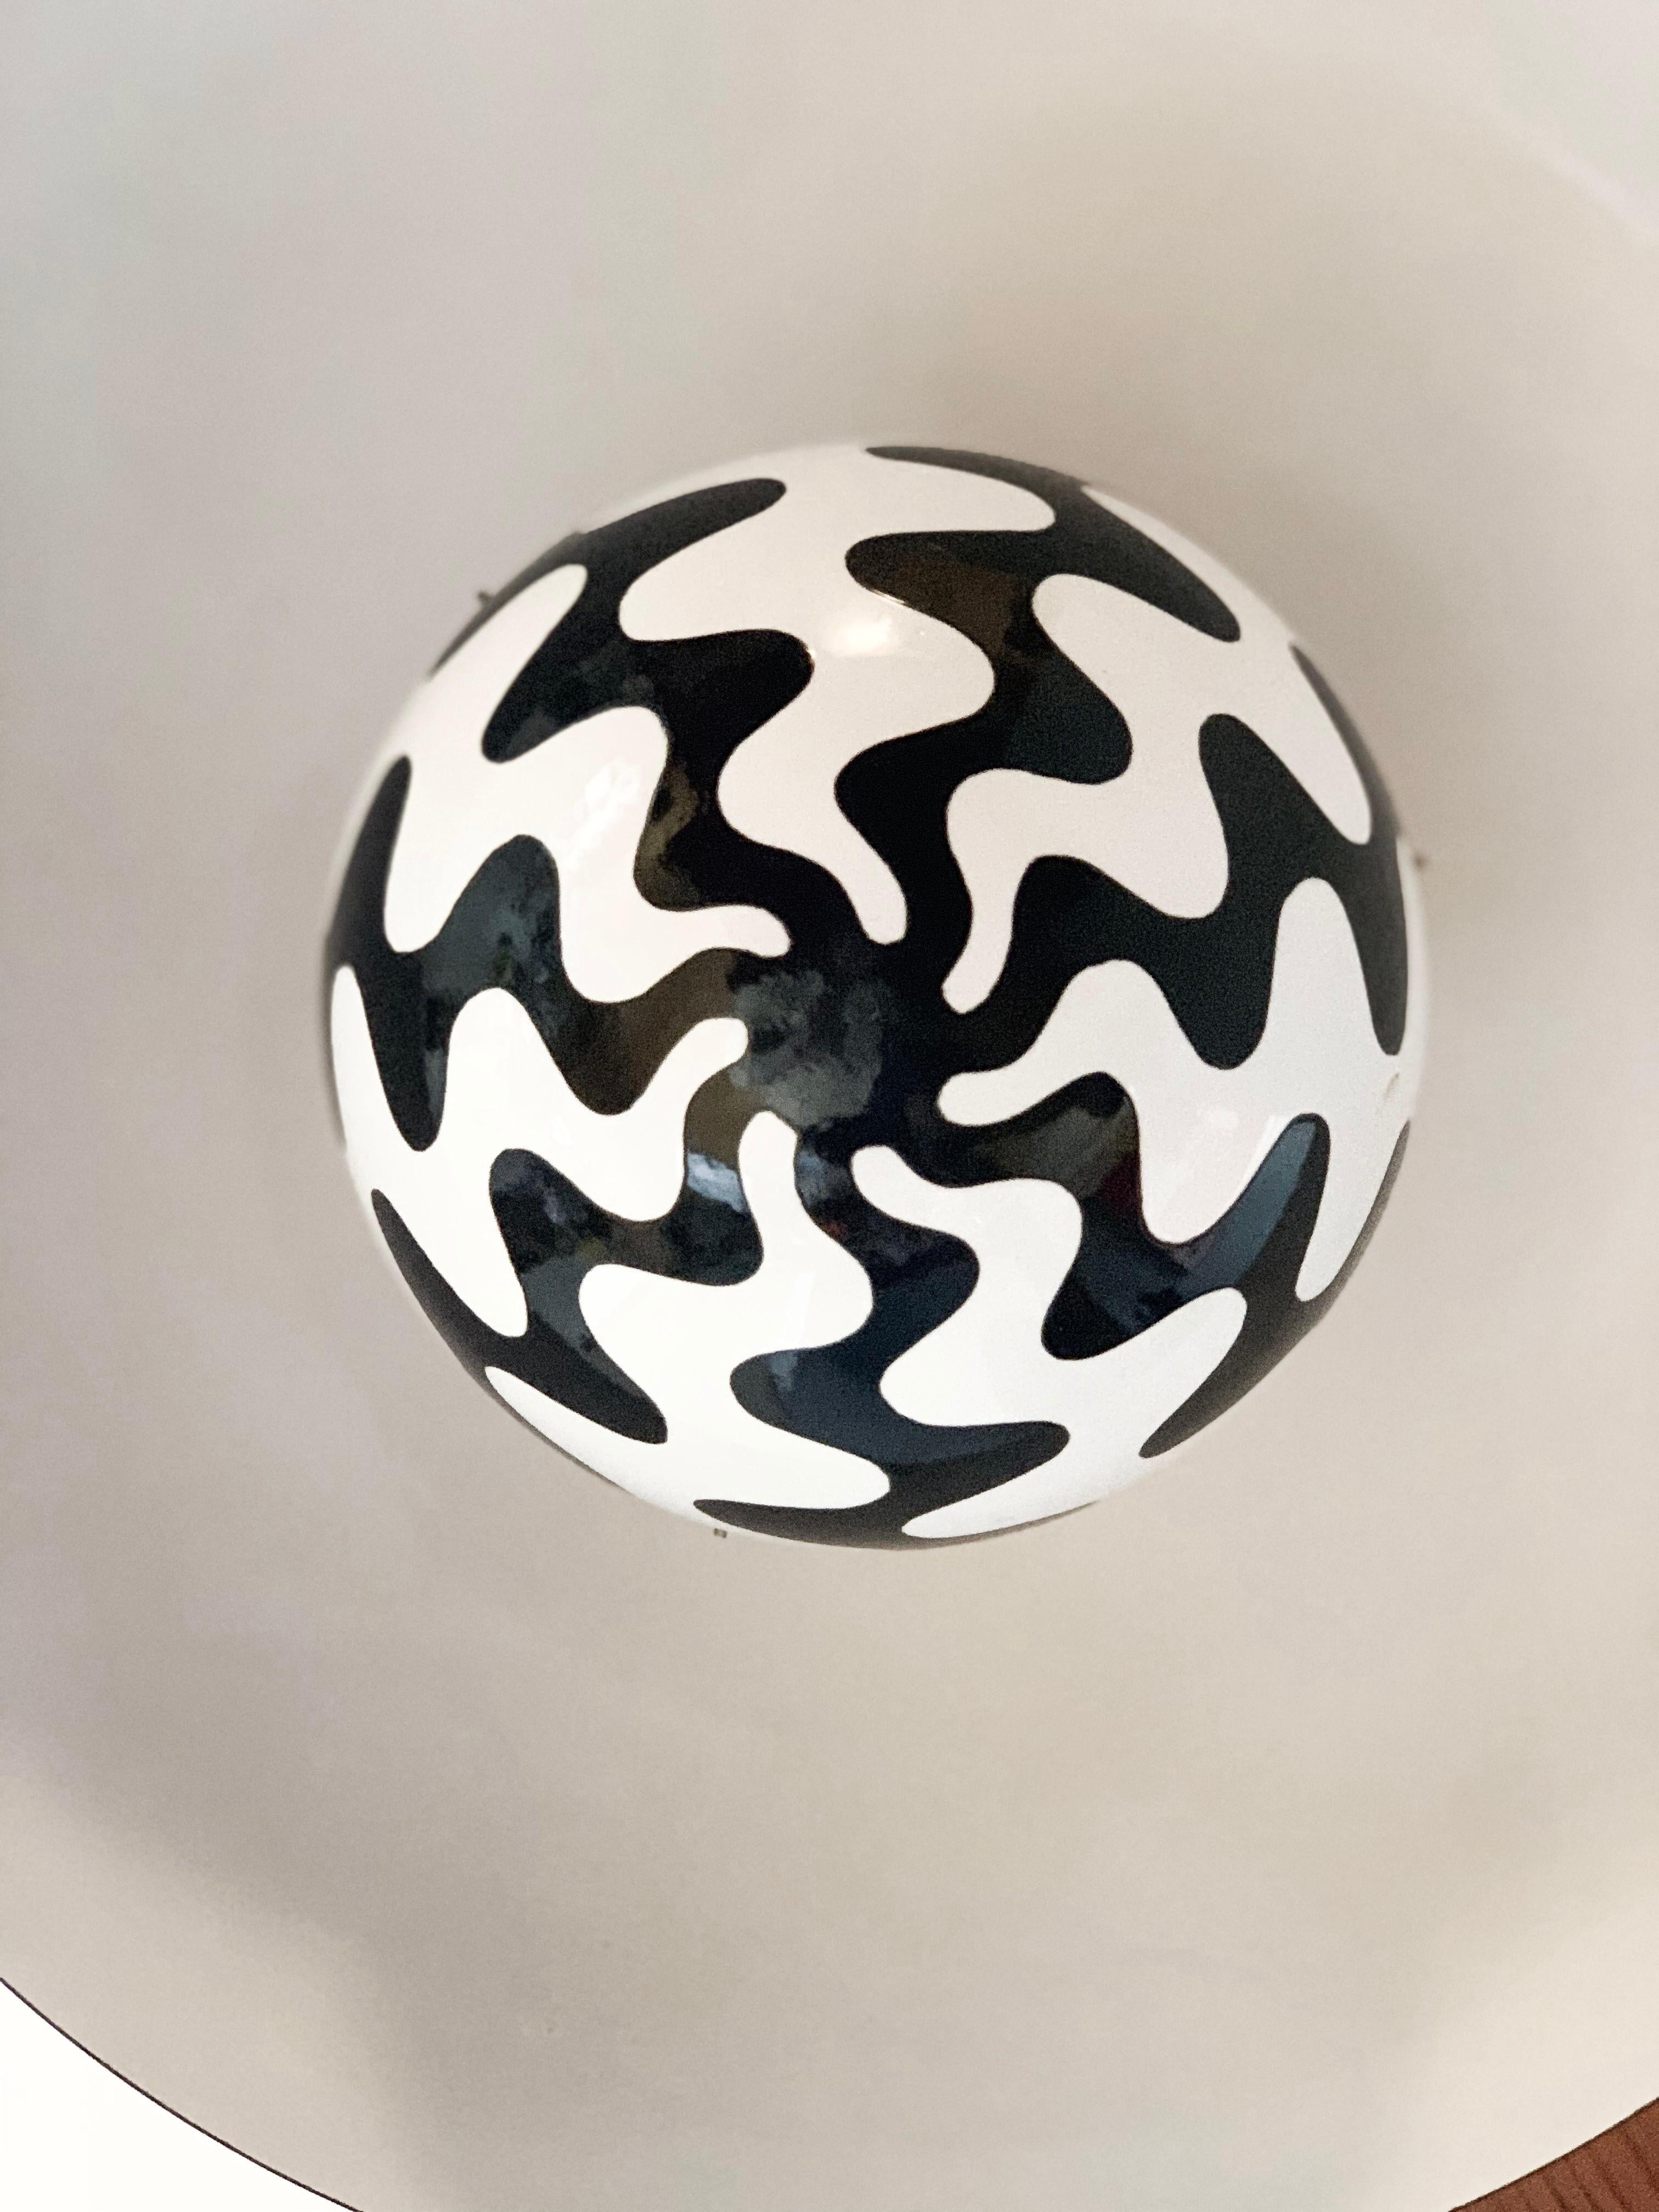 Extremely rare large scale Verner Panton black white flowerpot pendant chandelier . Produced for only one season, 1969-1970. Stunning piece.
